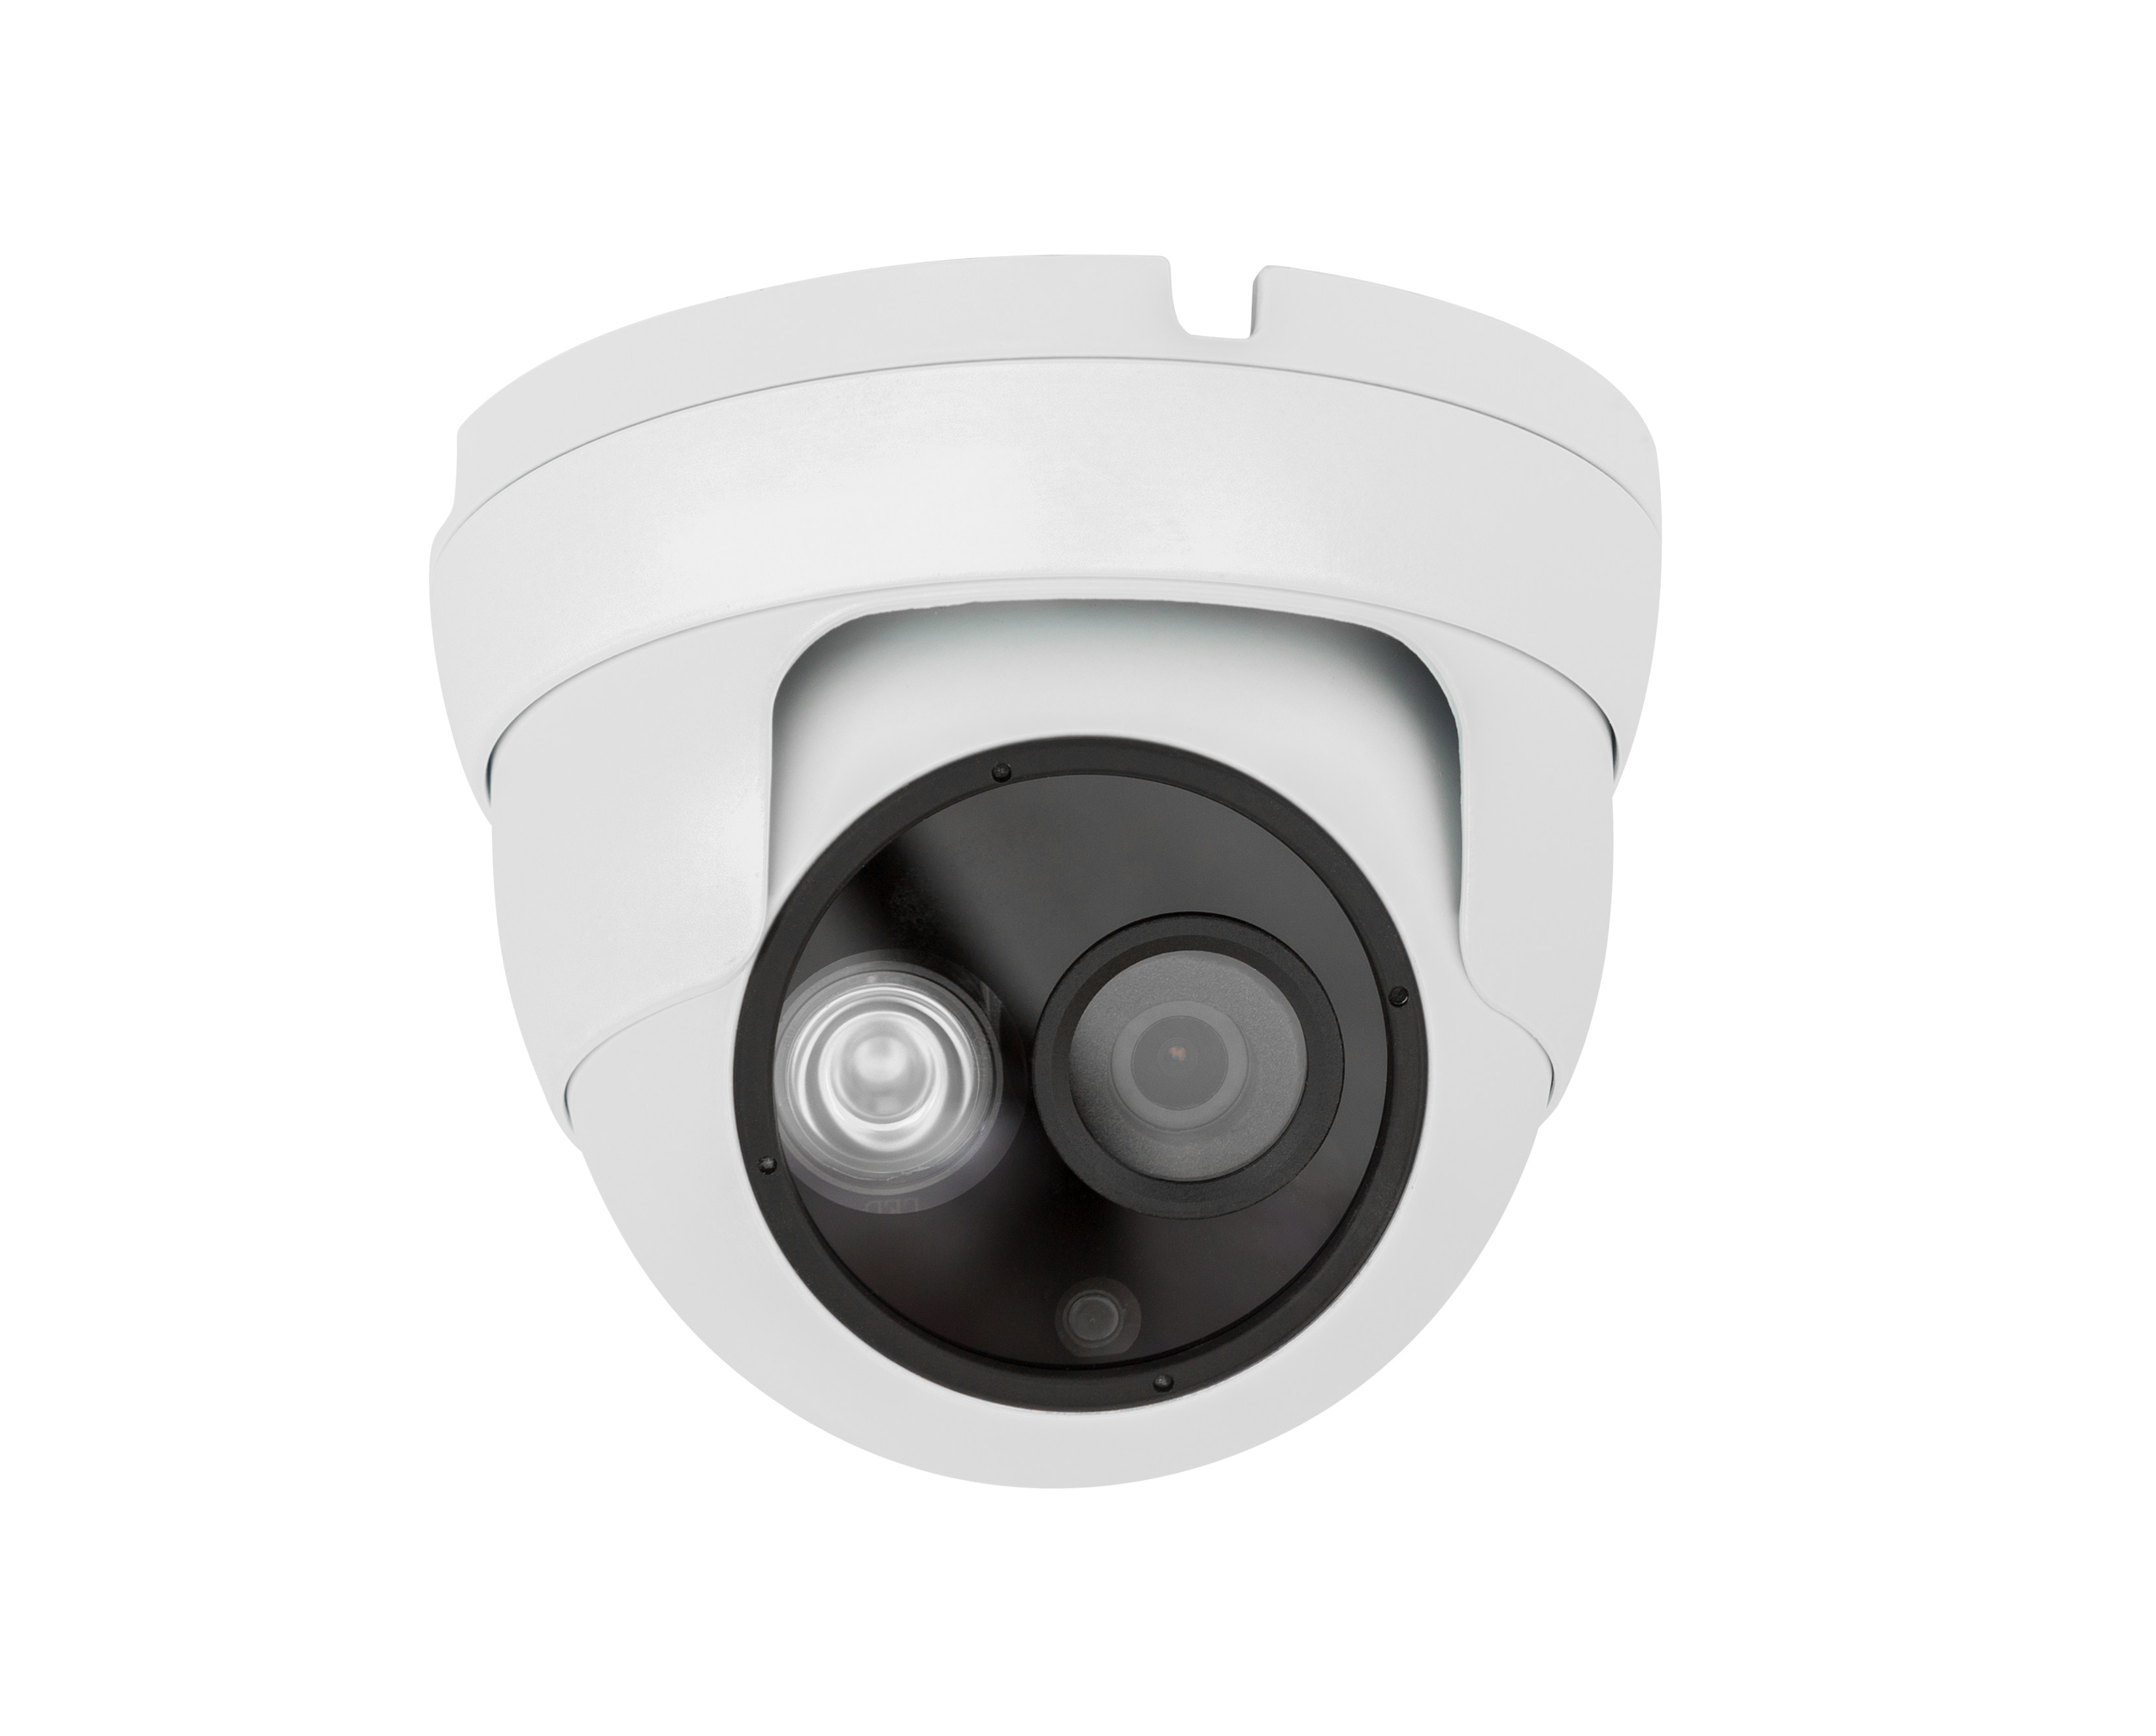 An image of a security camera. Photo: Shutterstock